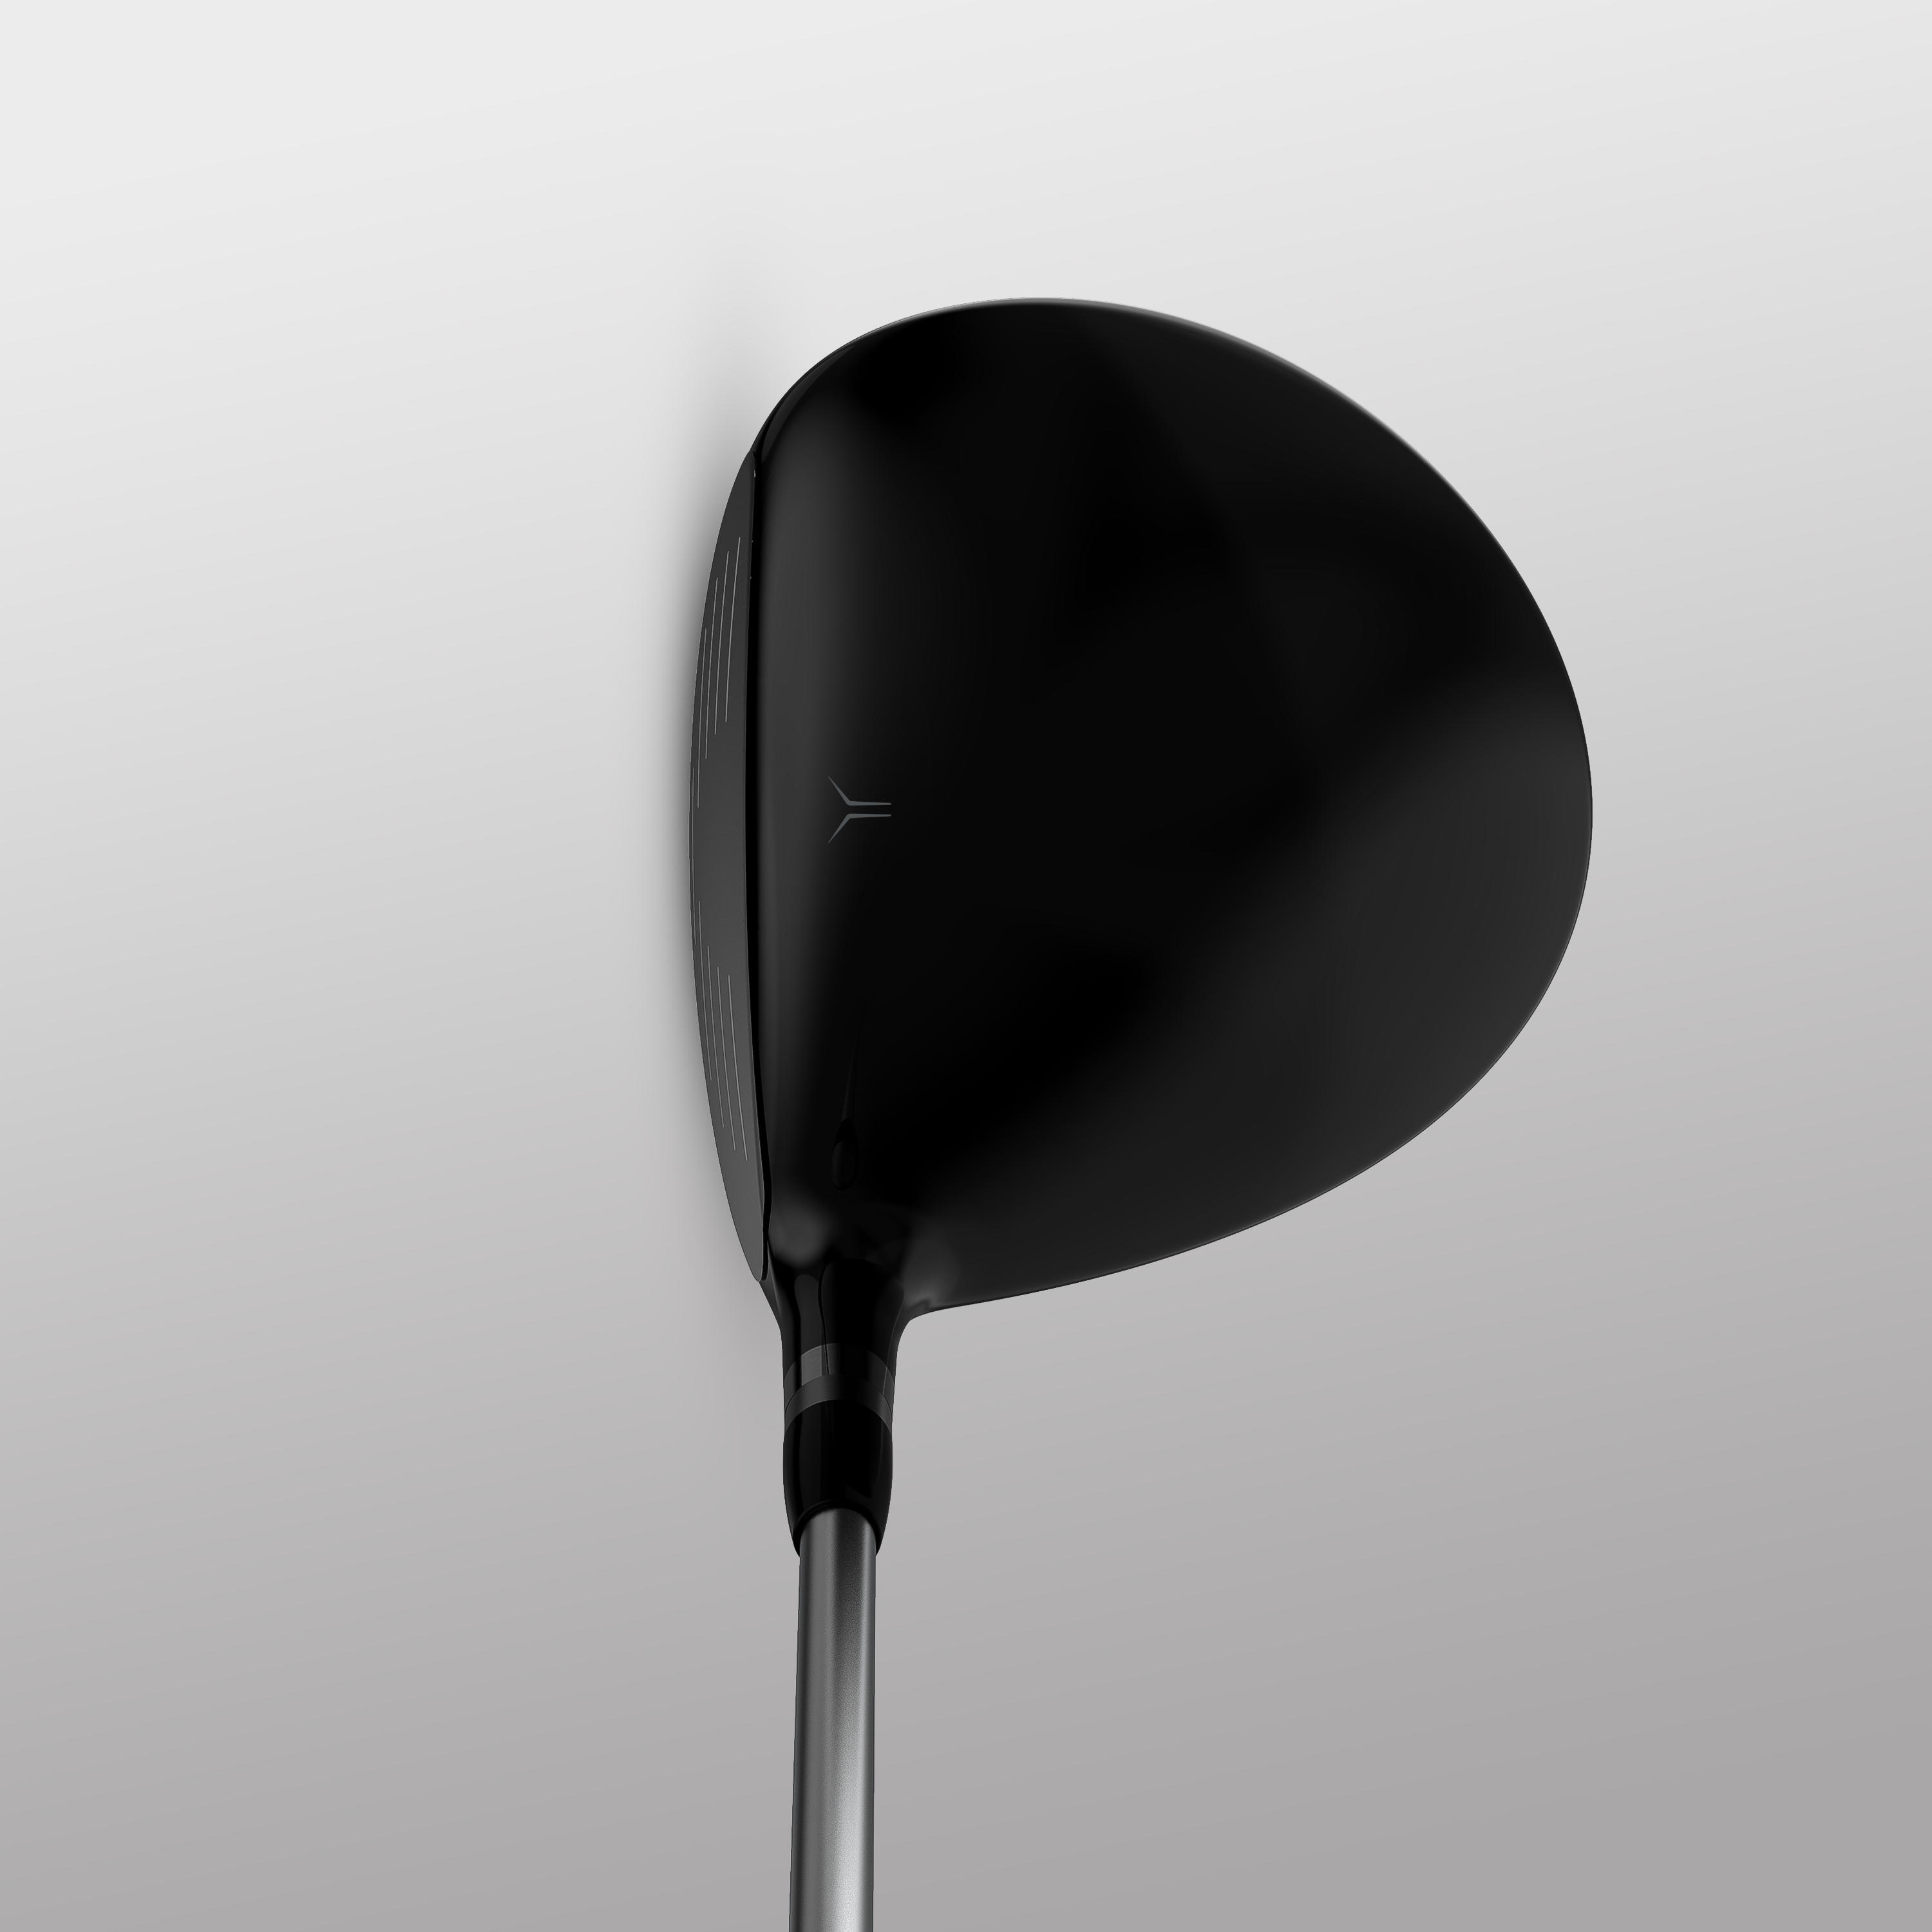 Golf driver right-handed size 2 high speed - INESIS 500 2/9